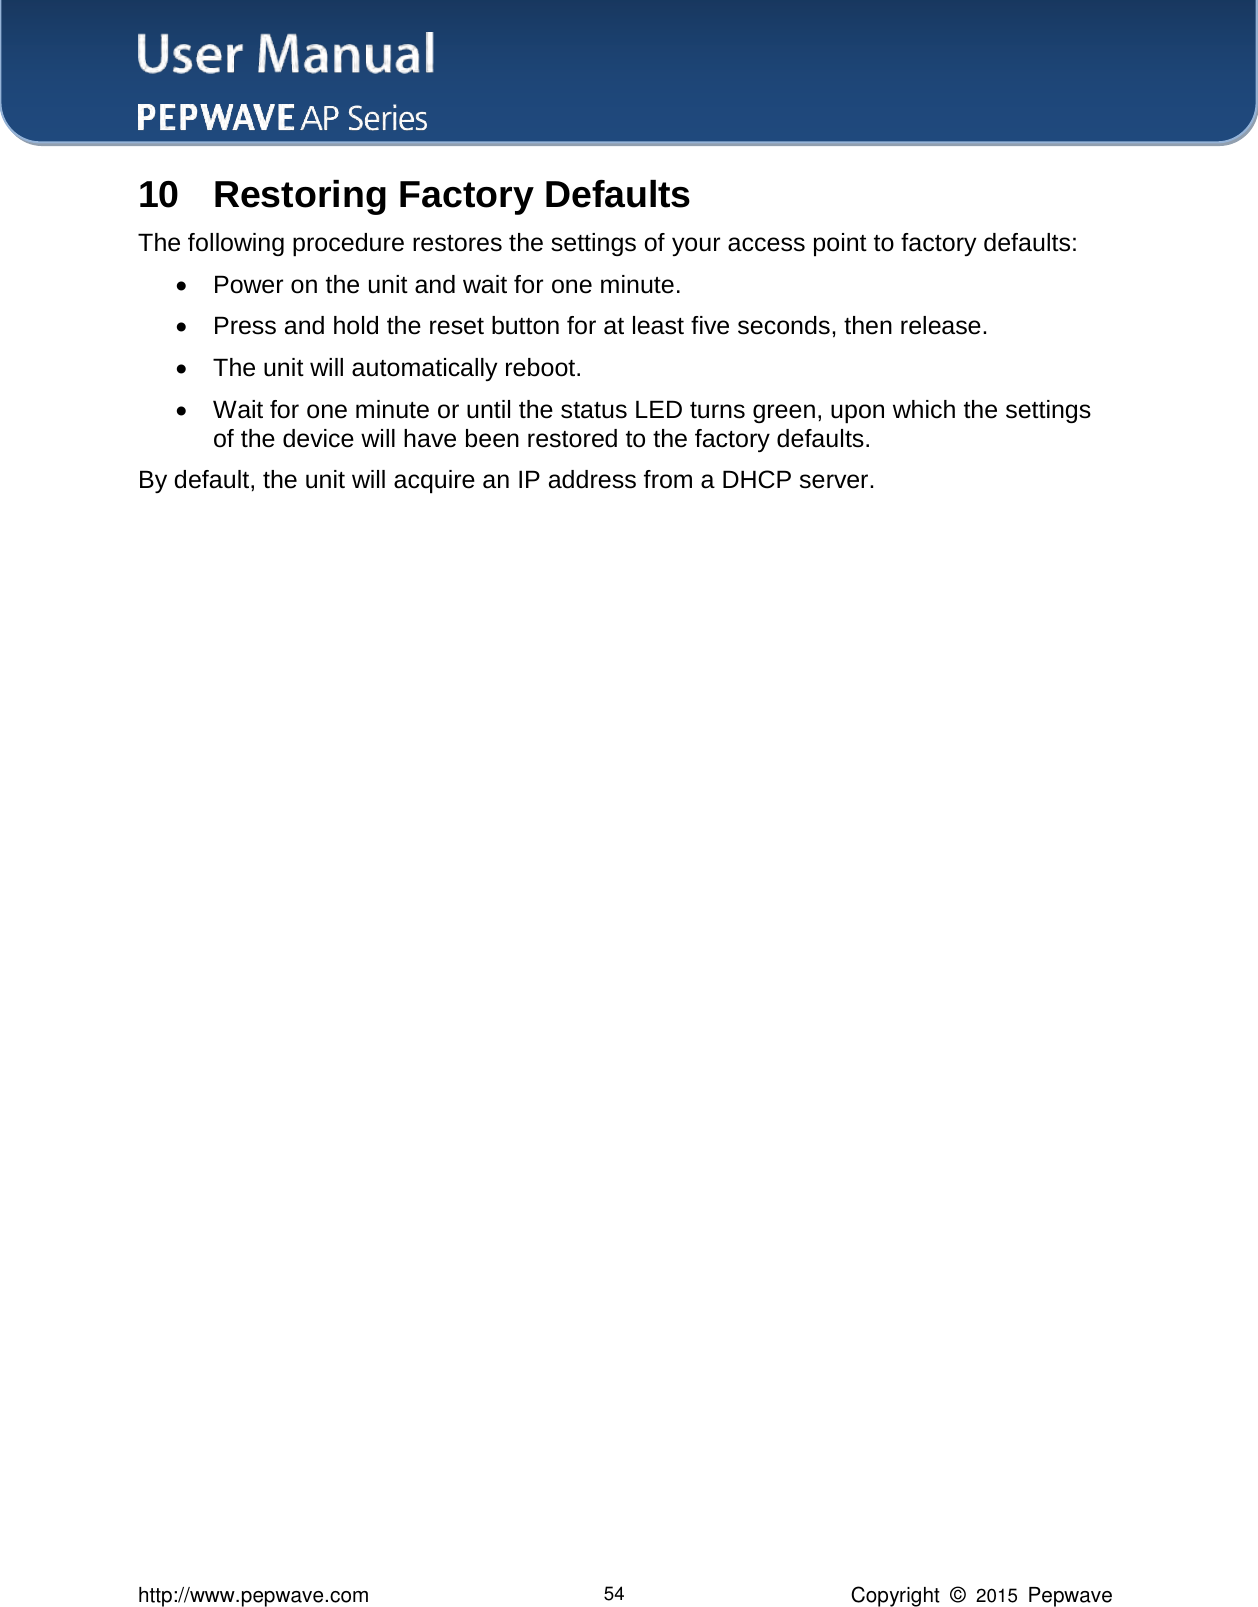 User Manual    http://www.pepwave.com 54 Copyright  ©  2015  Pepwave 10 Restoring Factory Defaults The following procedure restores the settings of your access point to factory defaults:  Power on the unit and wait for one minute.  Press and hold the reset button for at least five seconds, then release.  The unit will automatically reboot.  Wait for one minute or until the status LED turns green, upon which the settings of the device will have been restored to the factory defaults.     By default, the unit will acquire an IP address from a DHCP server.      